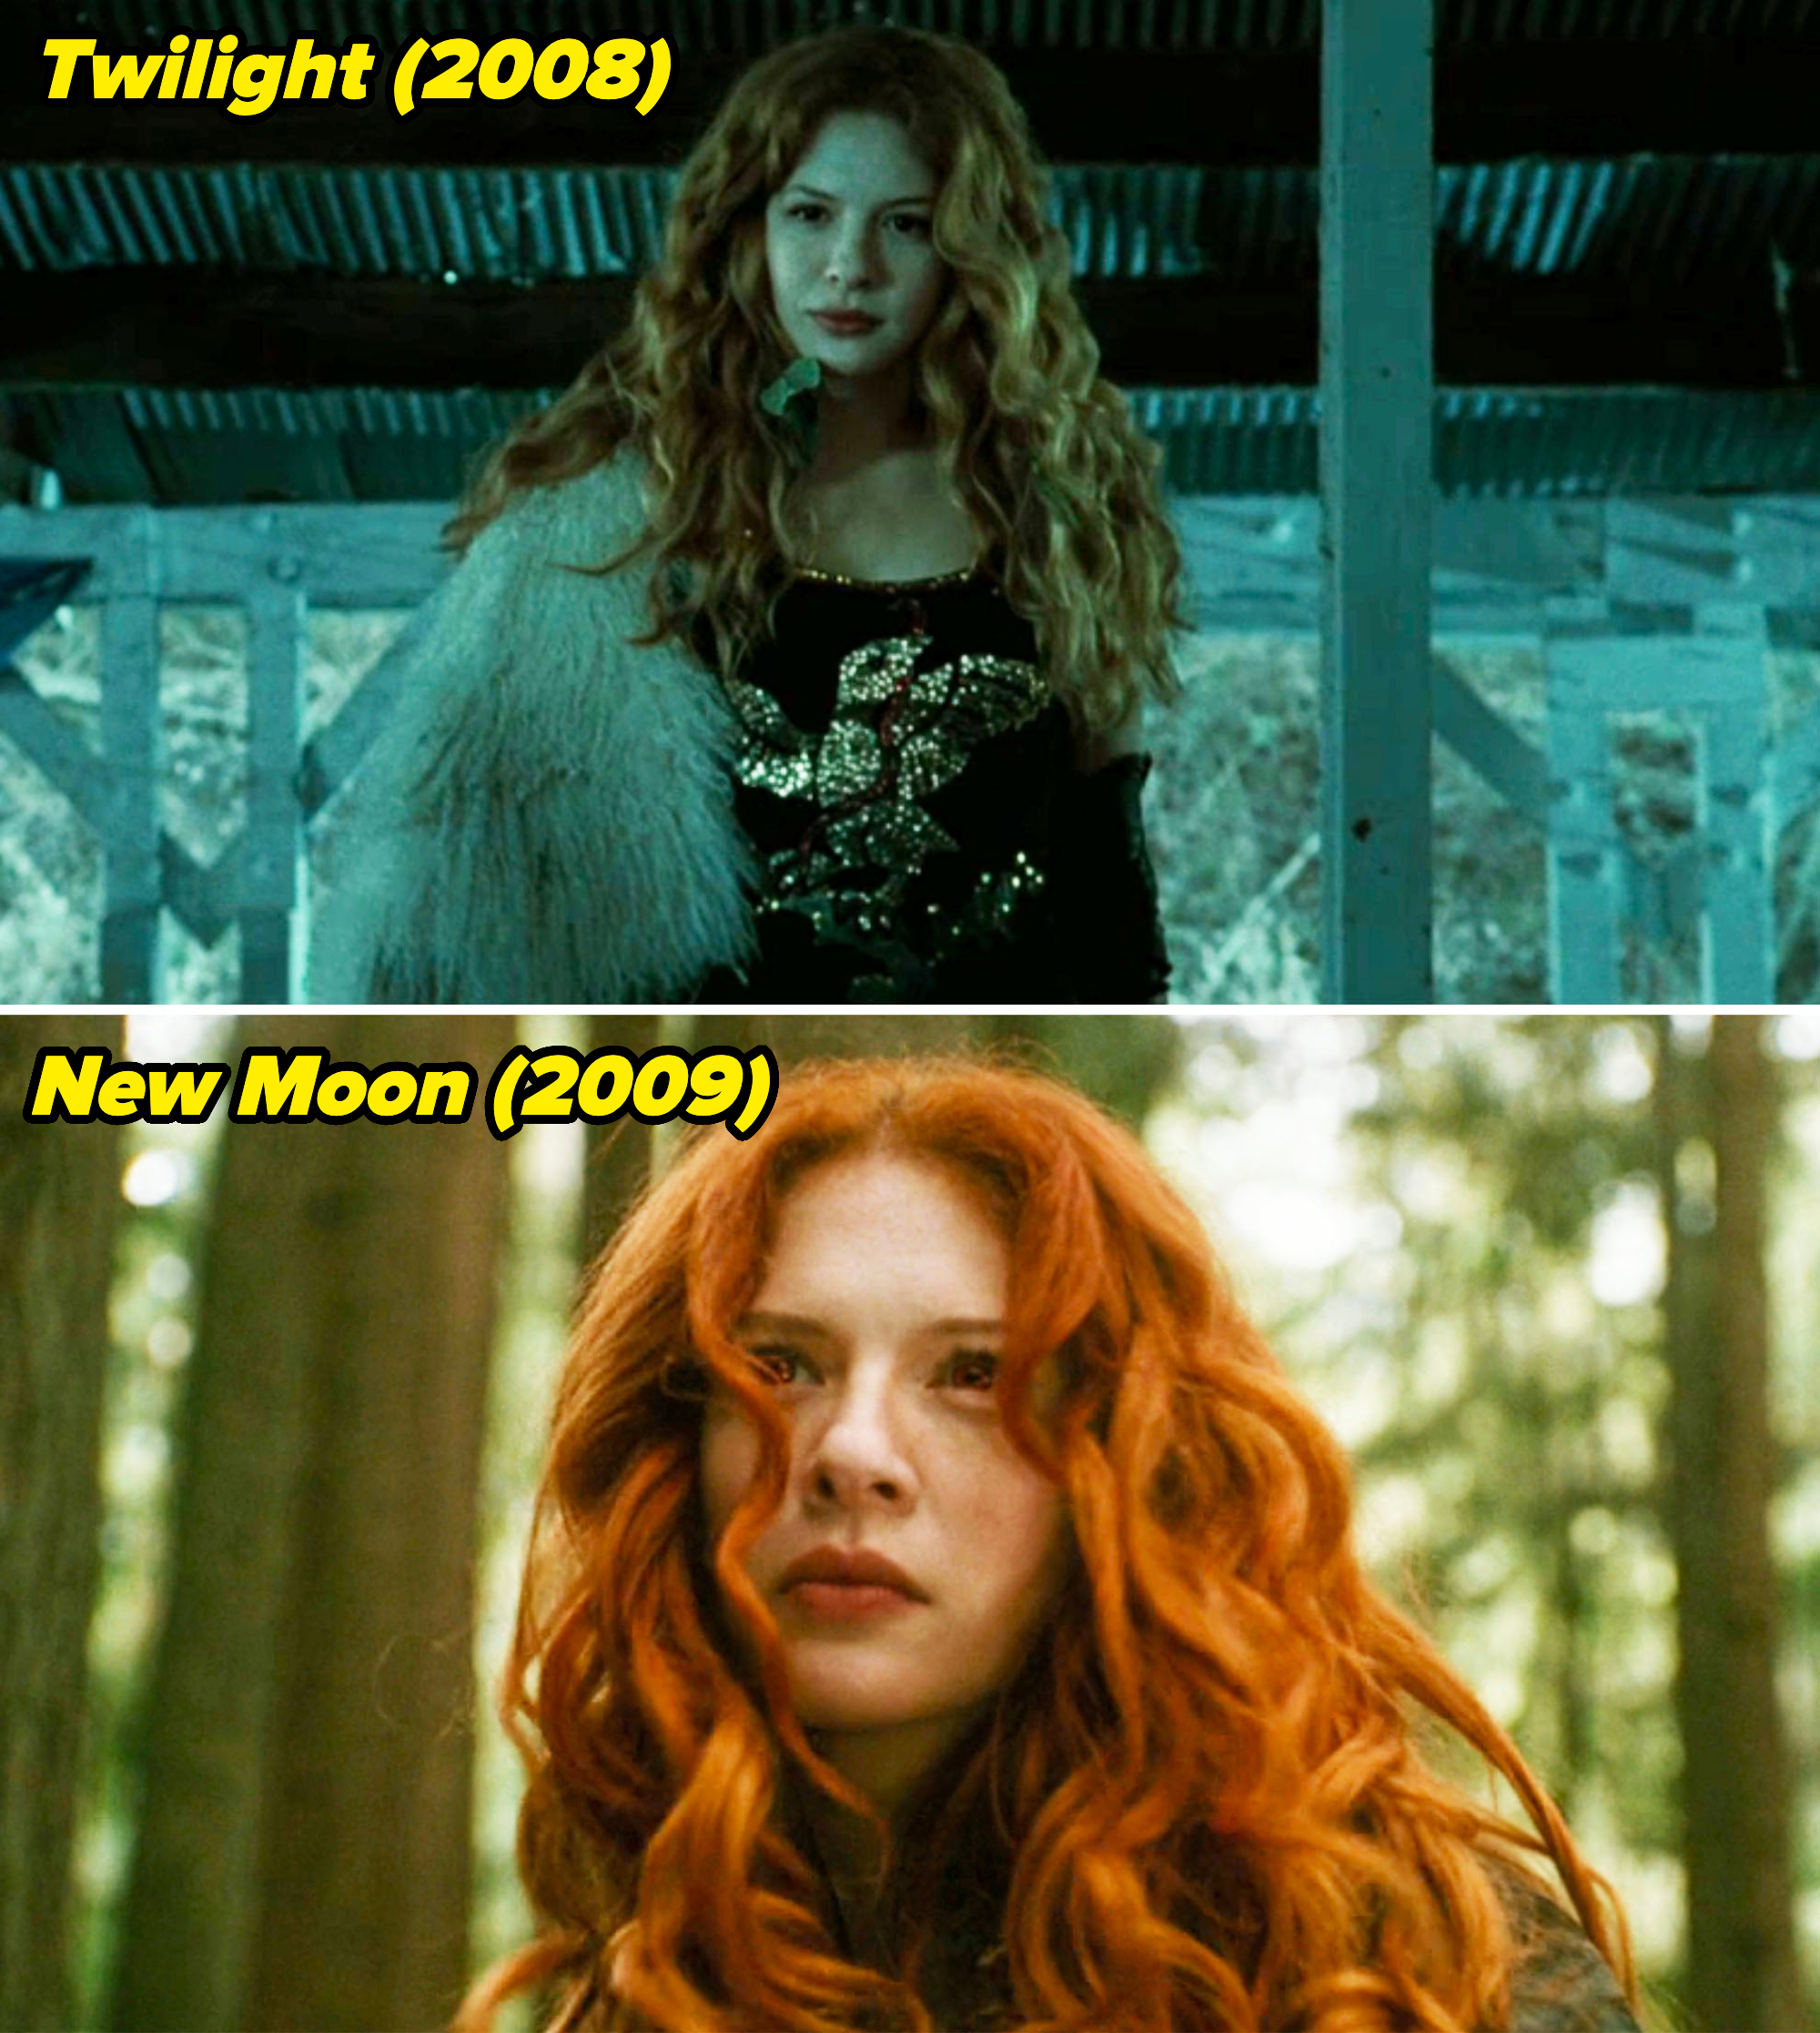 closeup of her in the woods for the first and second films